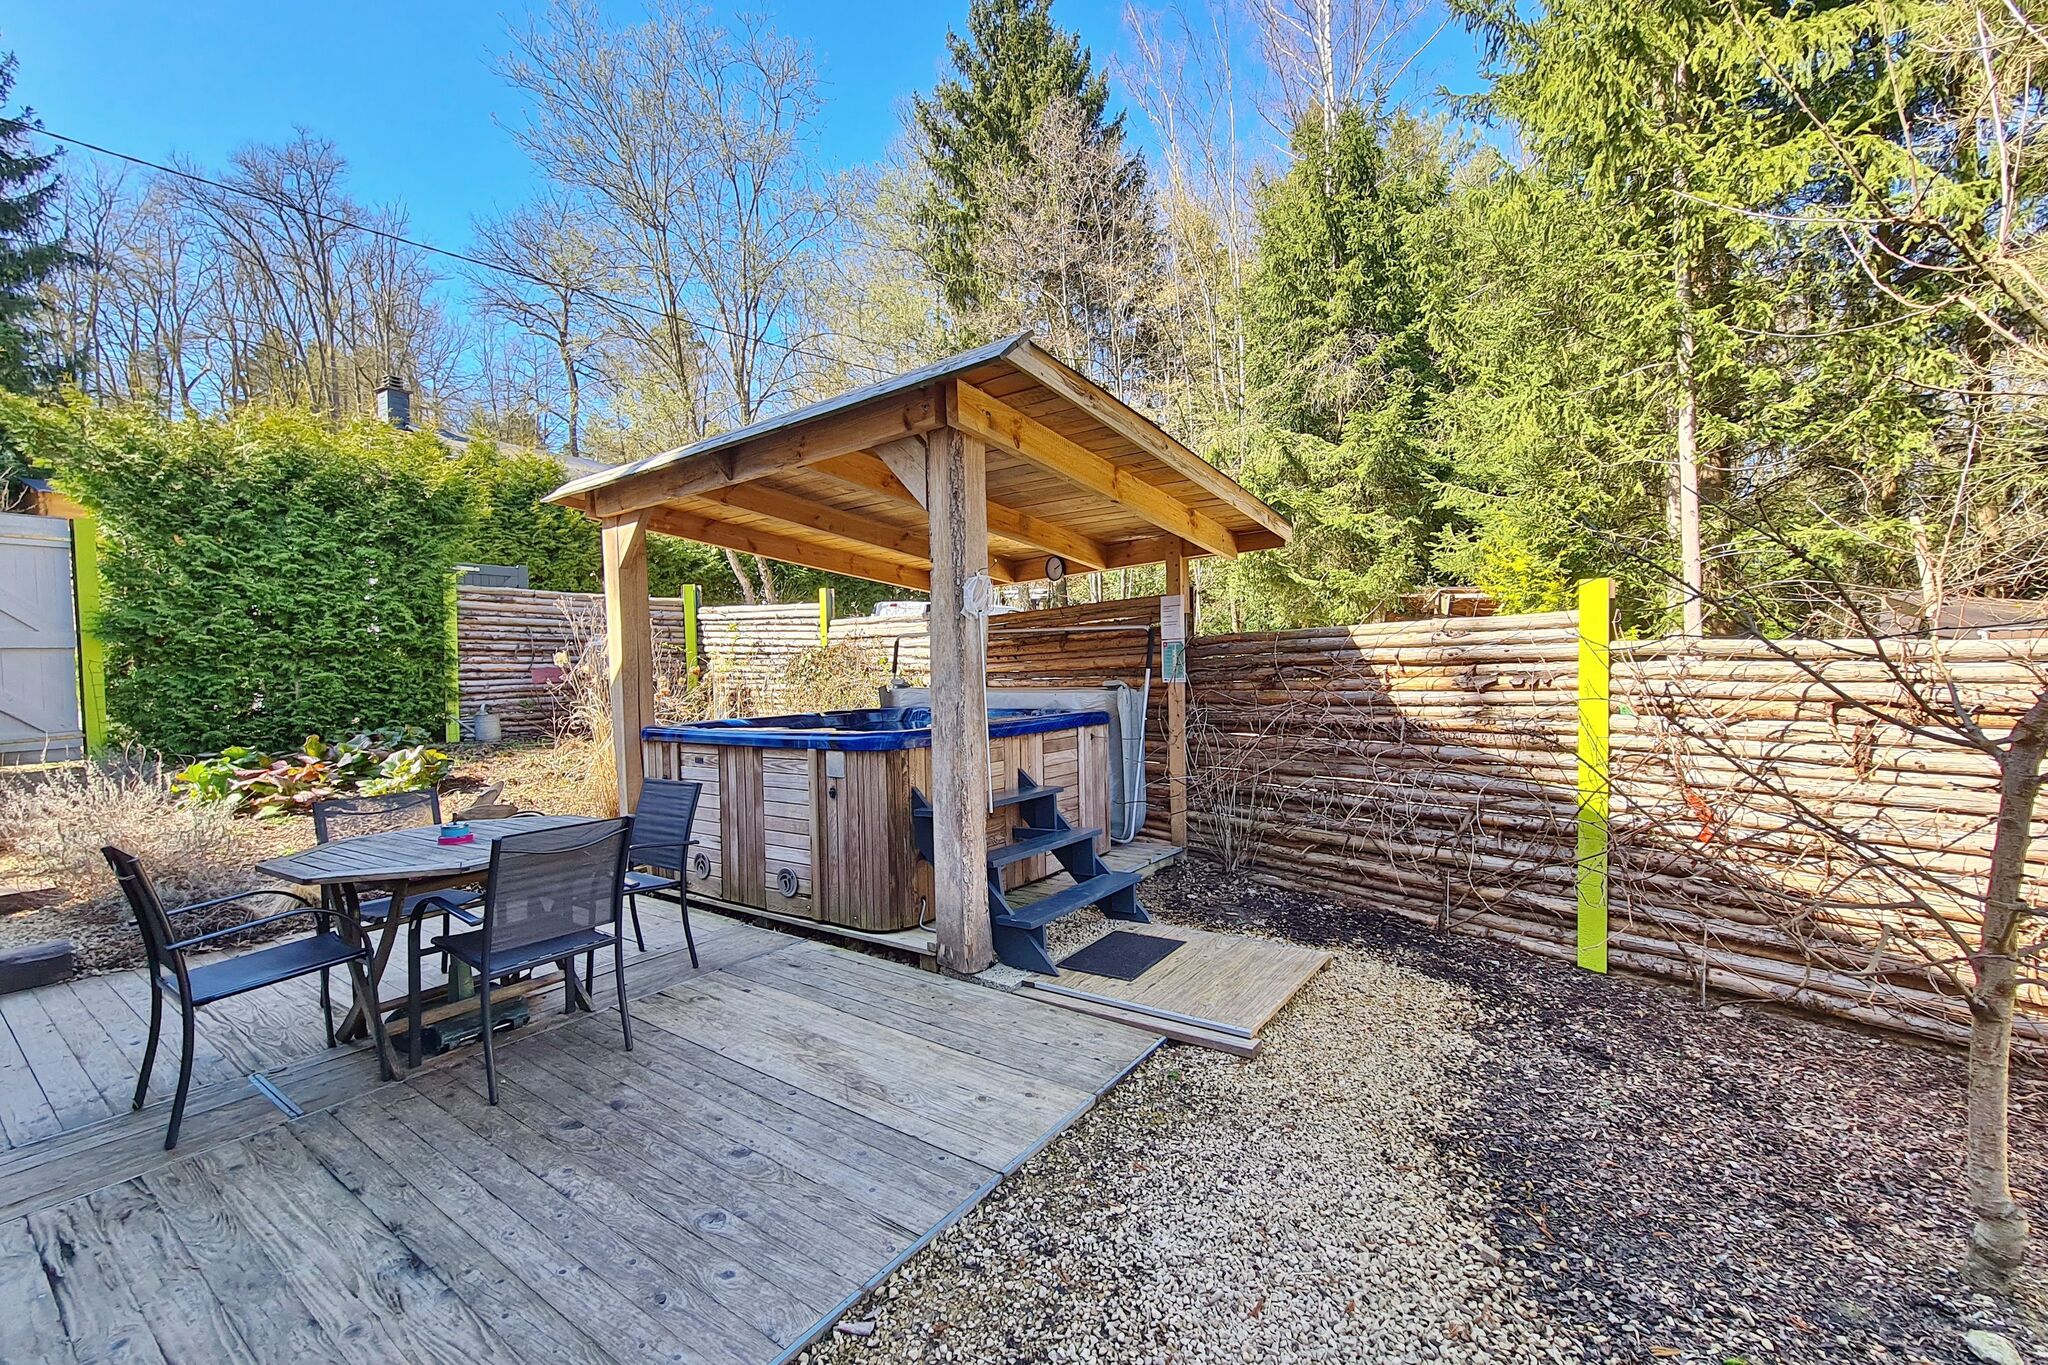 Chalet 4 pax 15 minutes from Durbuy with hot tub